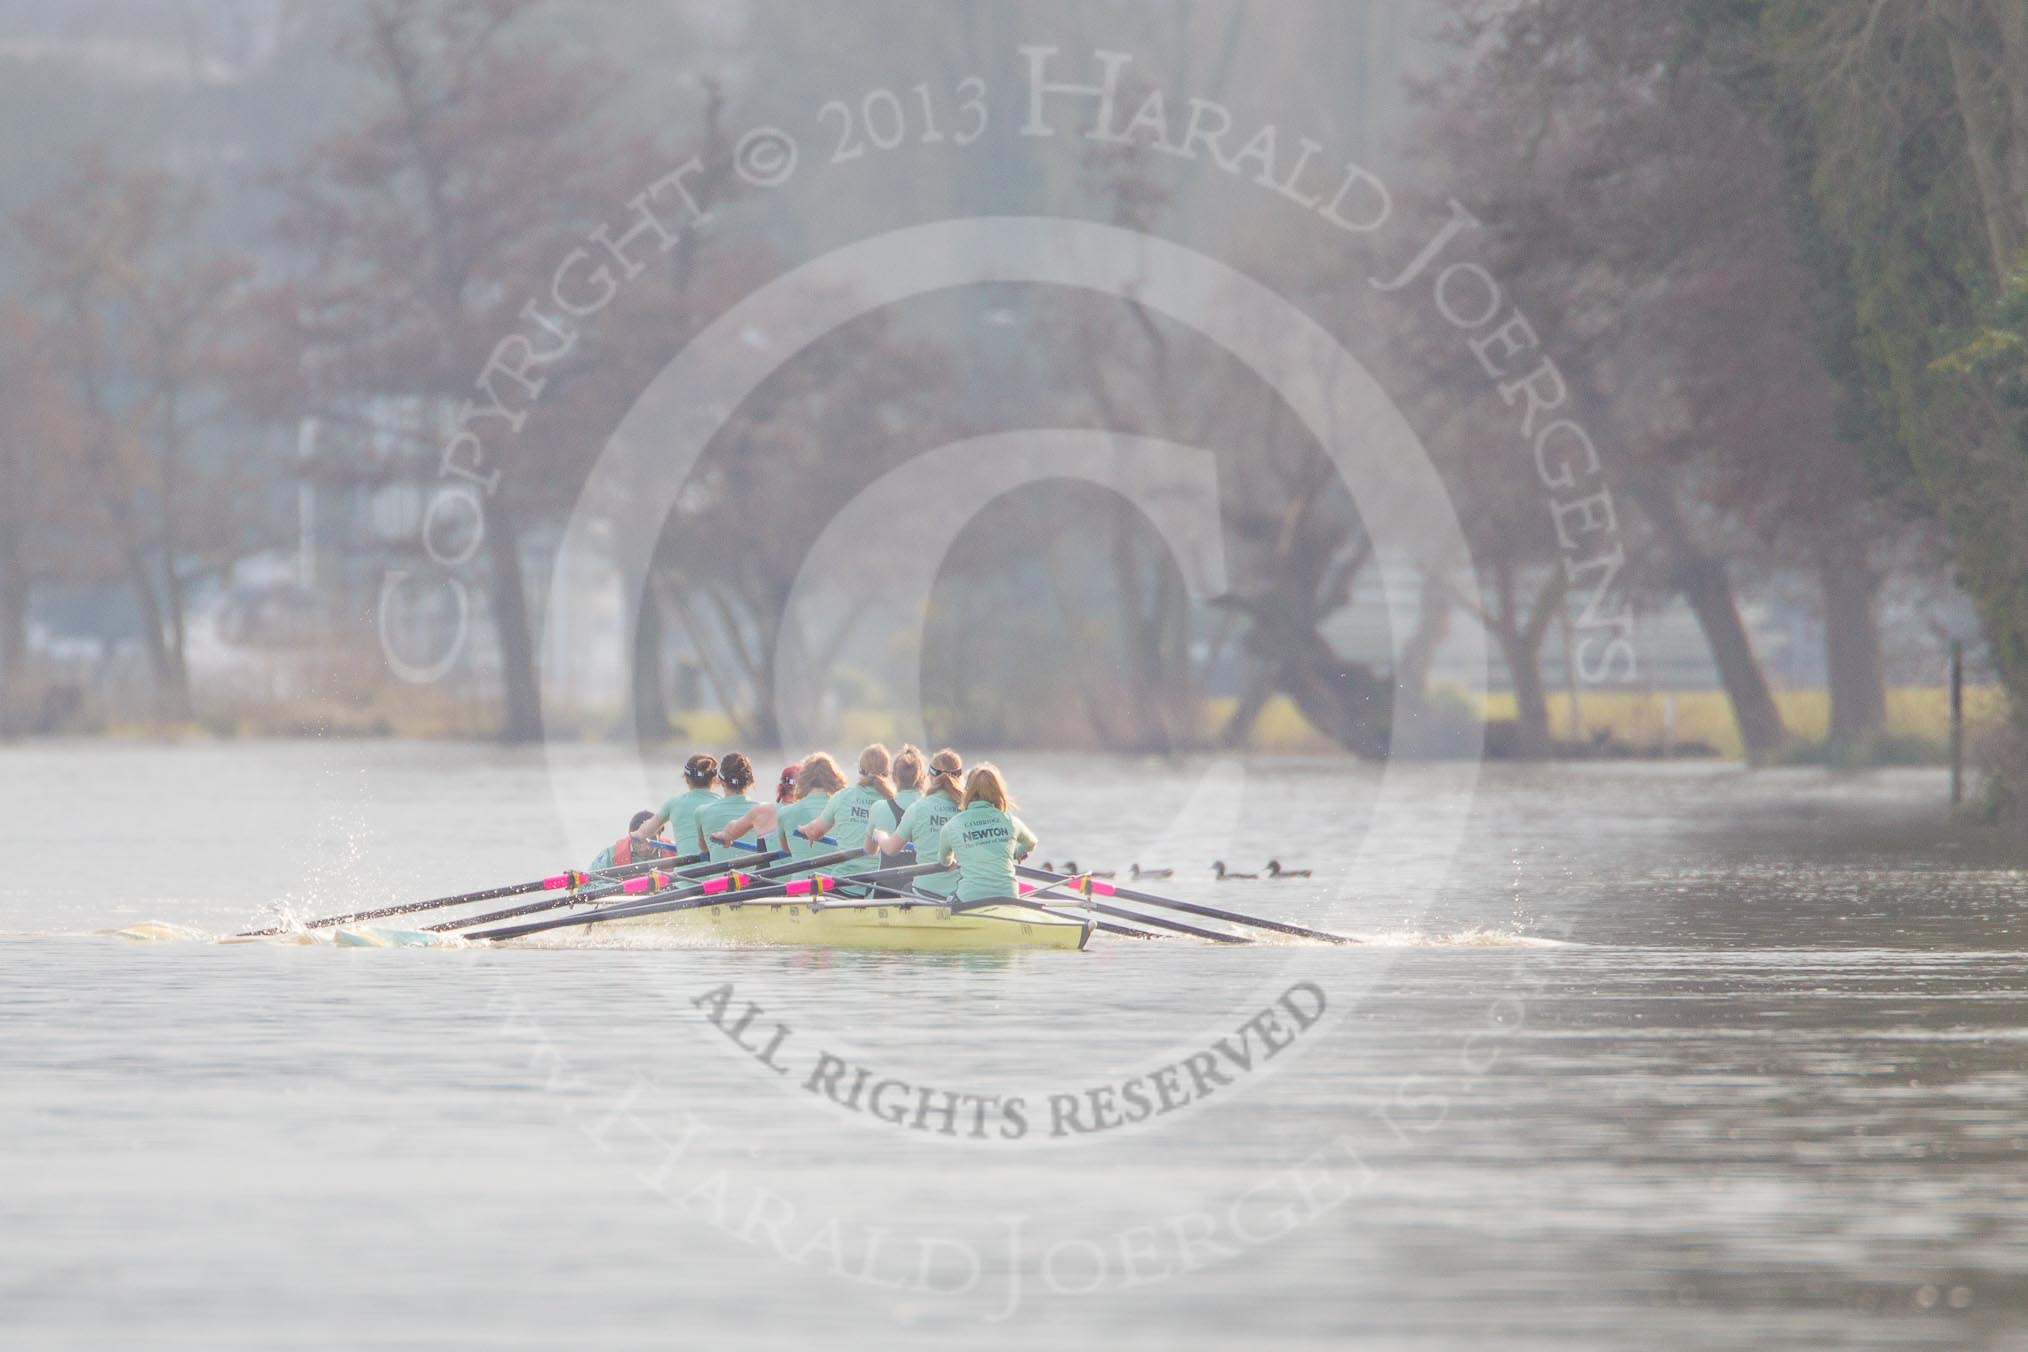 The Boat Race season 2013 - CUWBC training: The CUWBC reserve boat Blondie coming from Henley for their second training loop..
River Thames near Remenham,
Henley-on-Thames,
Oxfordshire,
United Kingdom,
on 19 March 2013 at 16:05, image #107